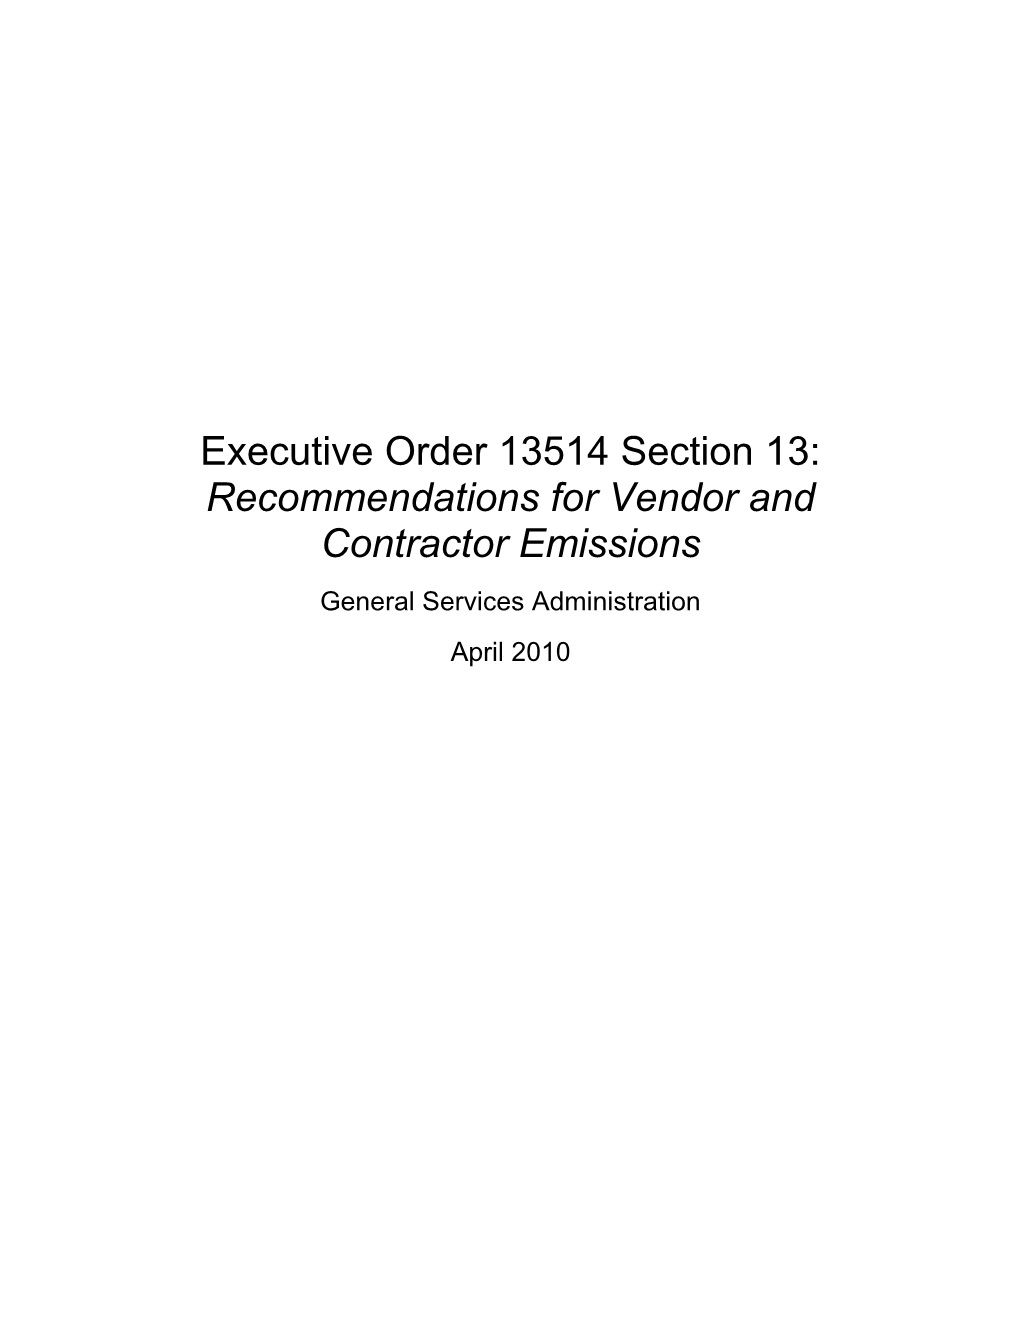 Executive Order 13514 Section 13: Recommendations for Vendor and Contractor Emissions General Services Administration April 2010